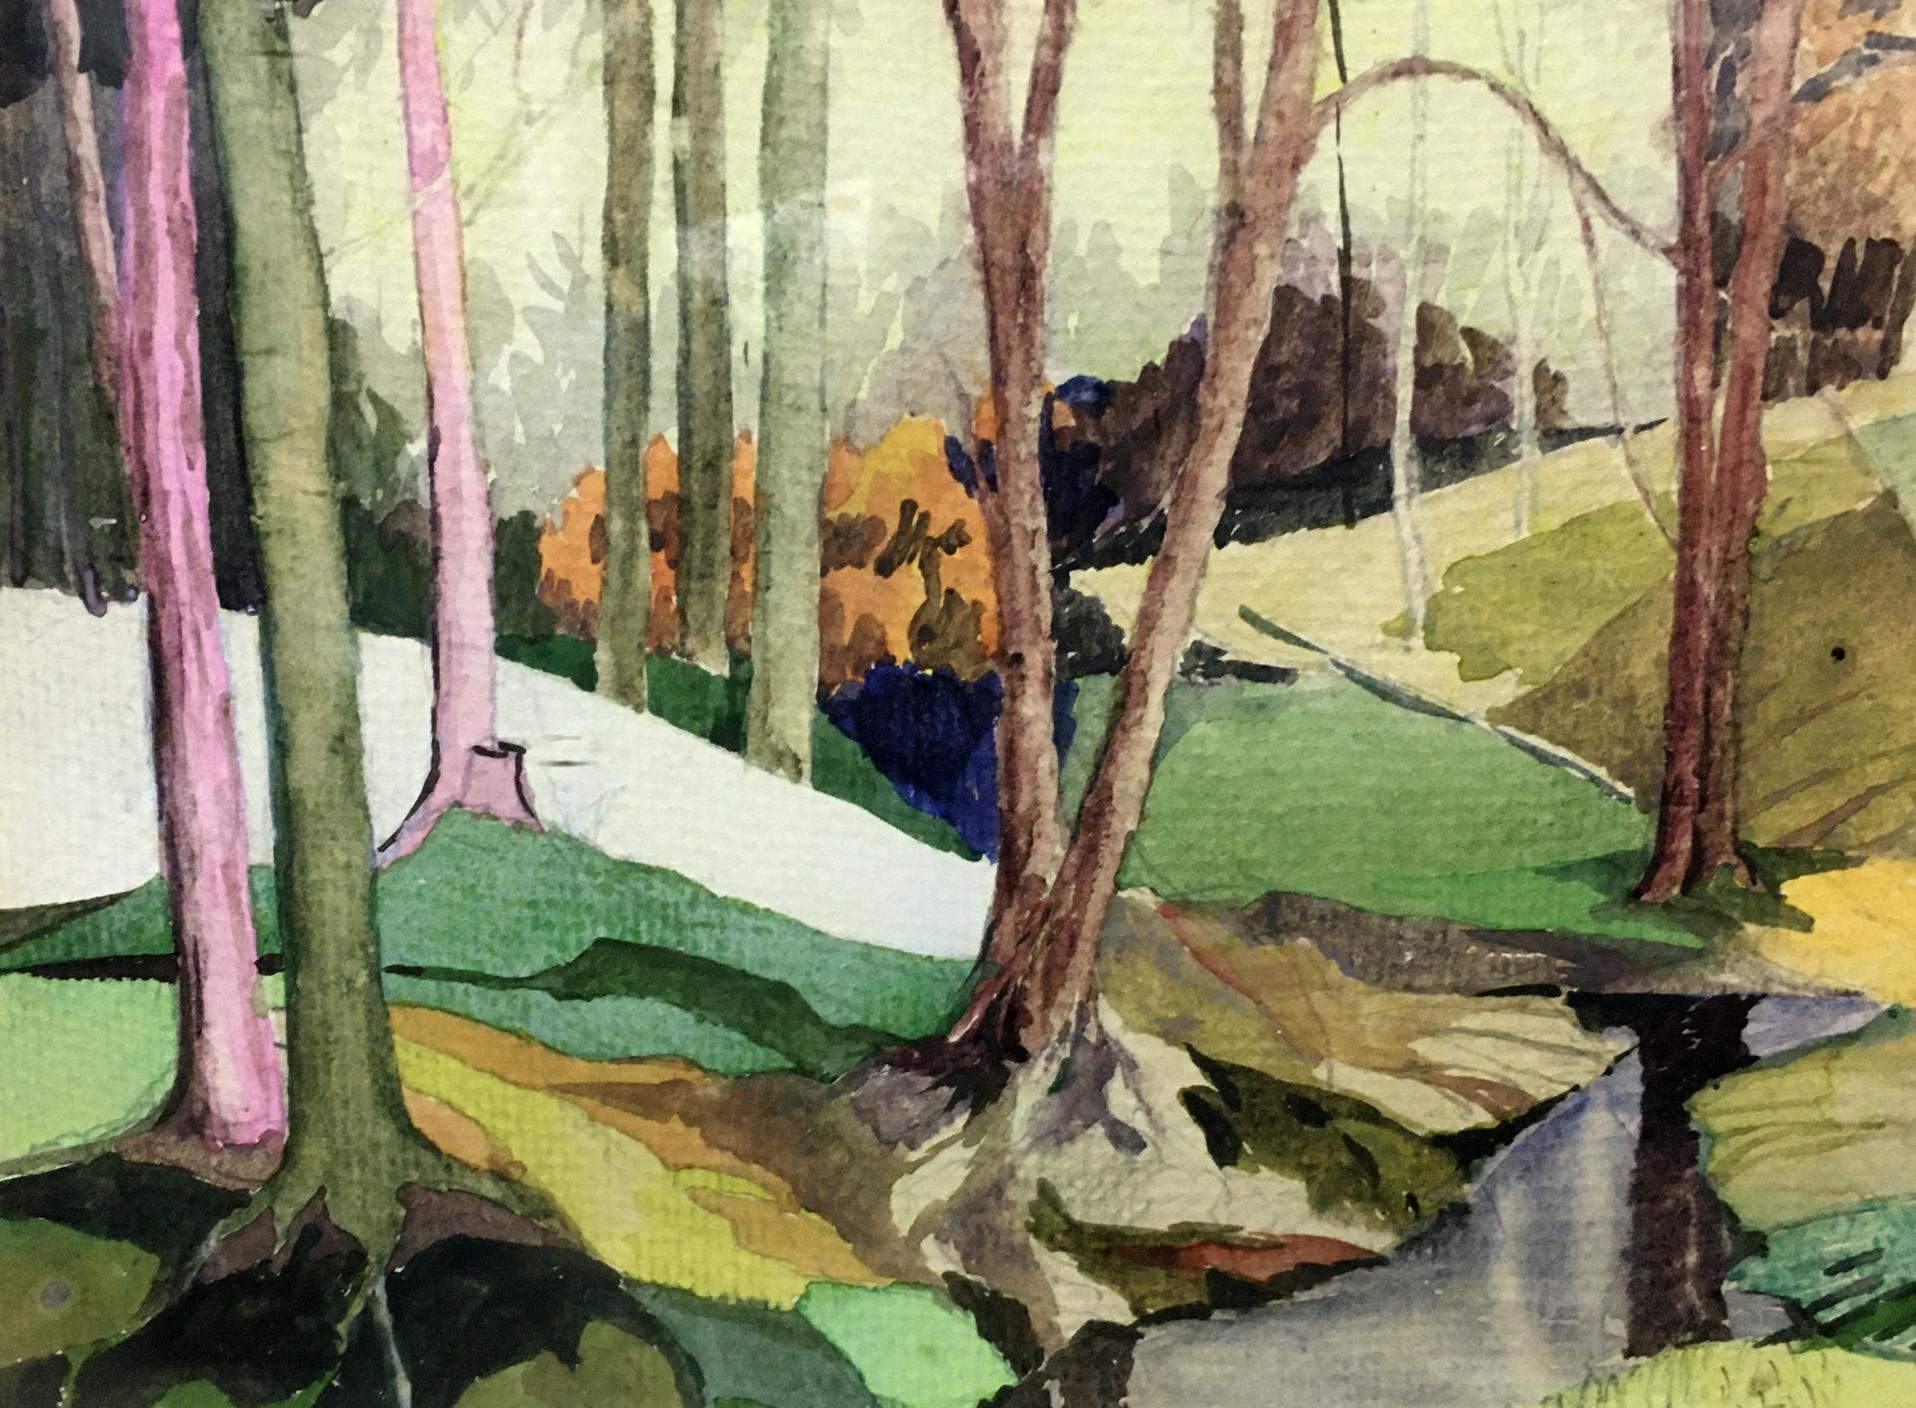 The beauty of a forest stream is captured in V. Olisevich's watercolor painting